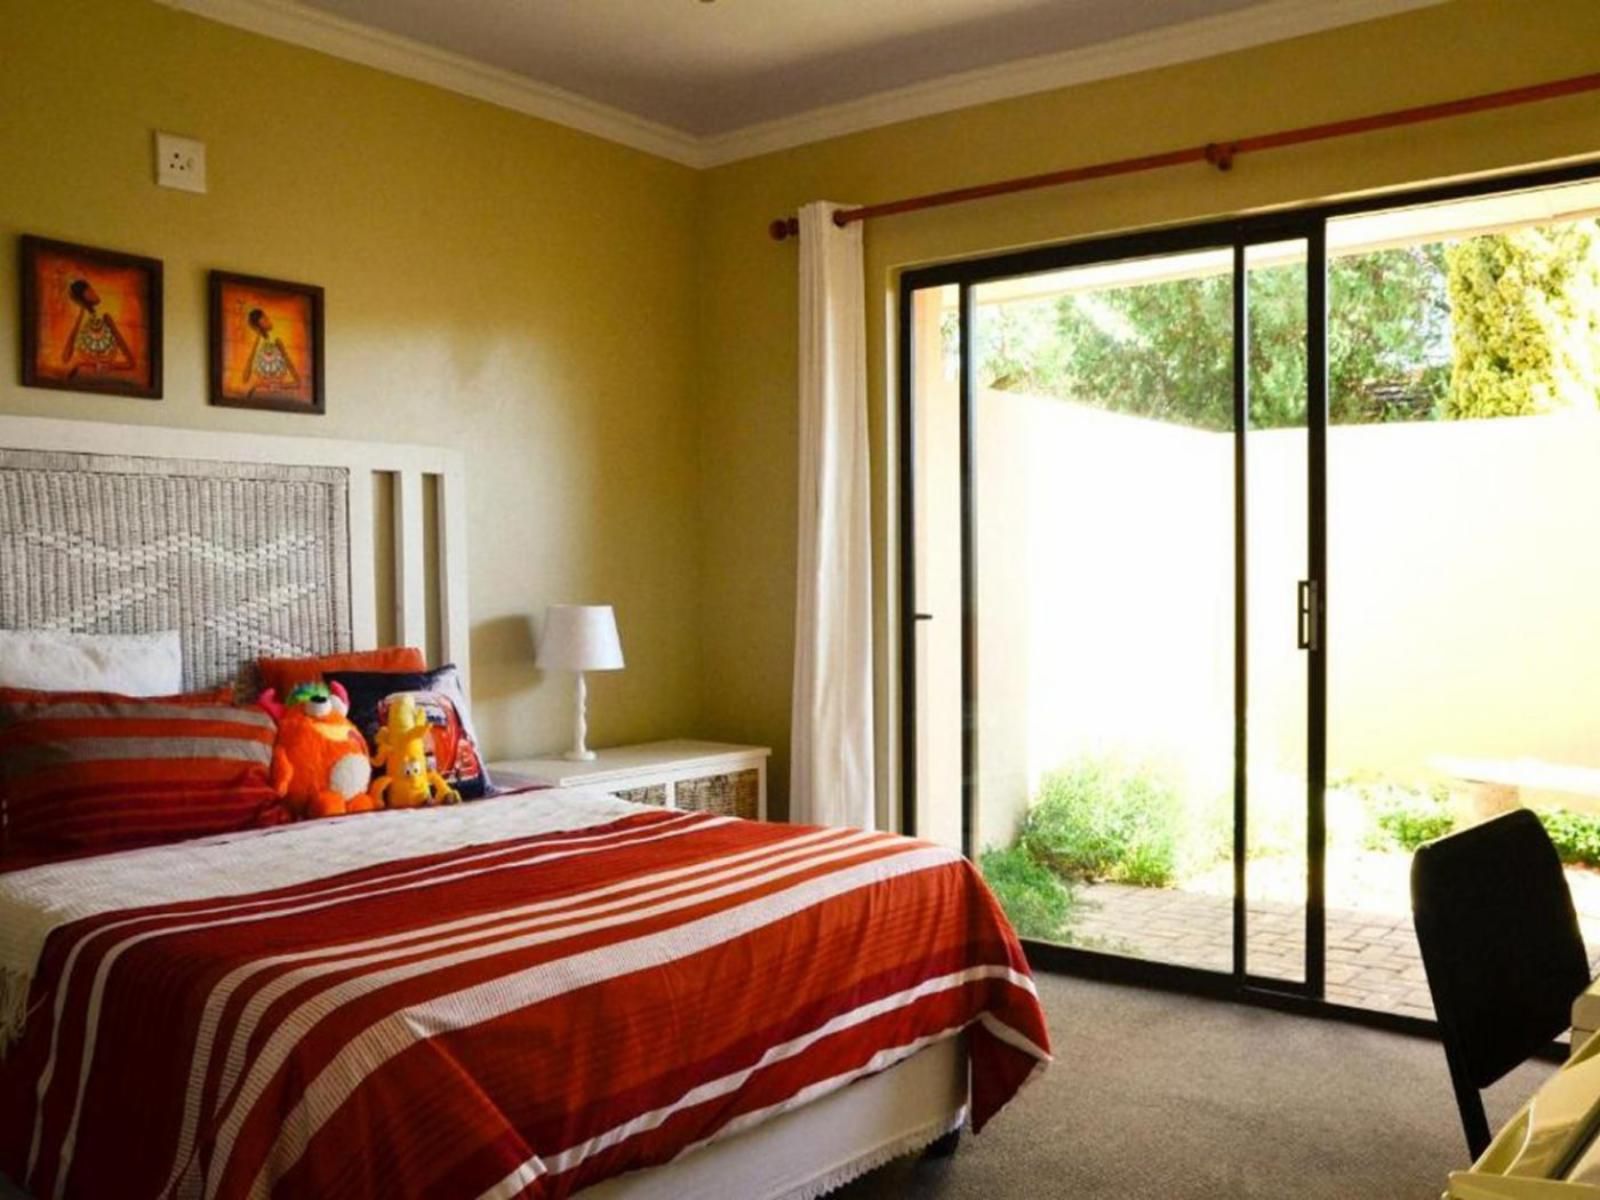 Wille Garden Flair Guesthouse Universitas Bloemfontein Free State South Africa Bedroom